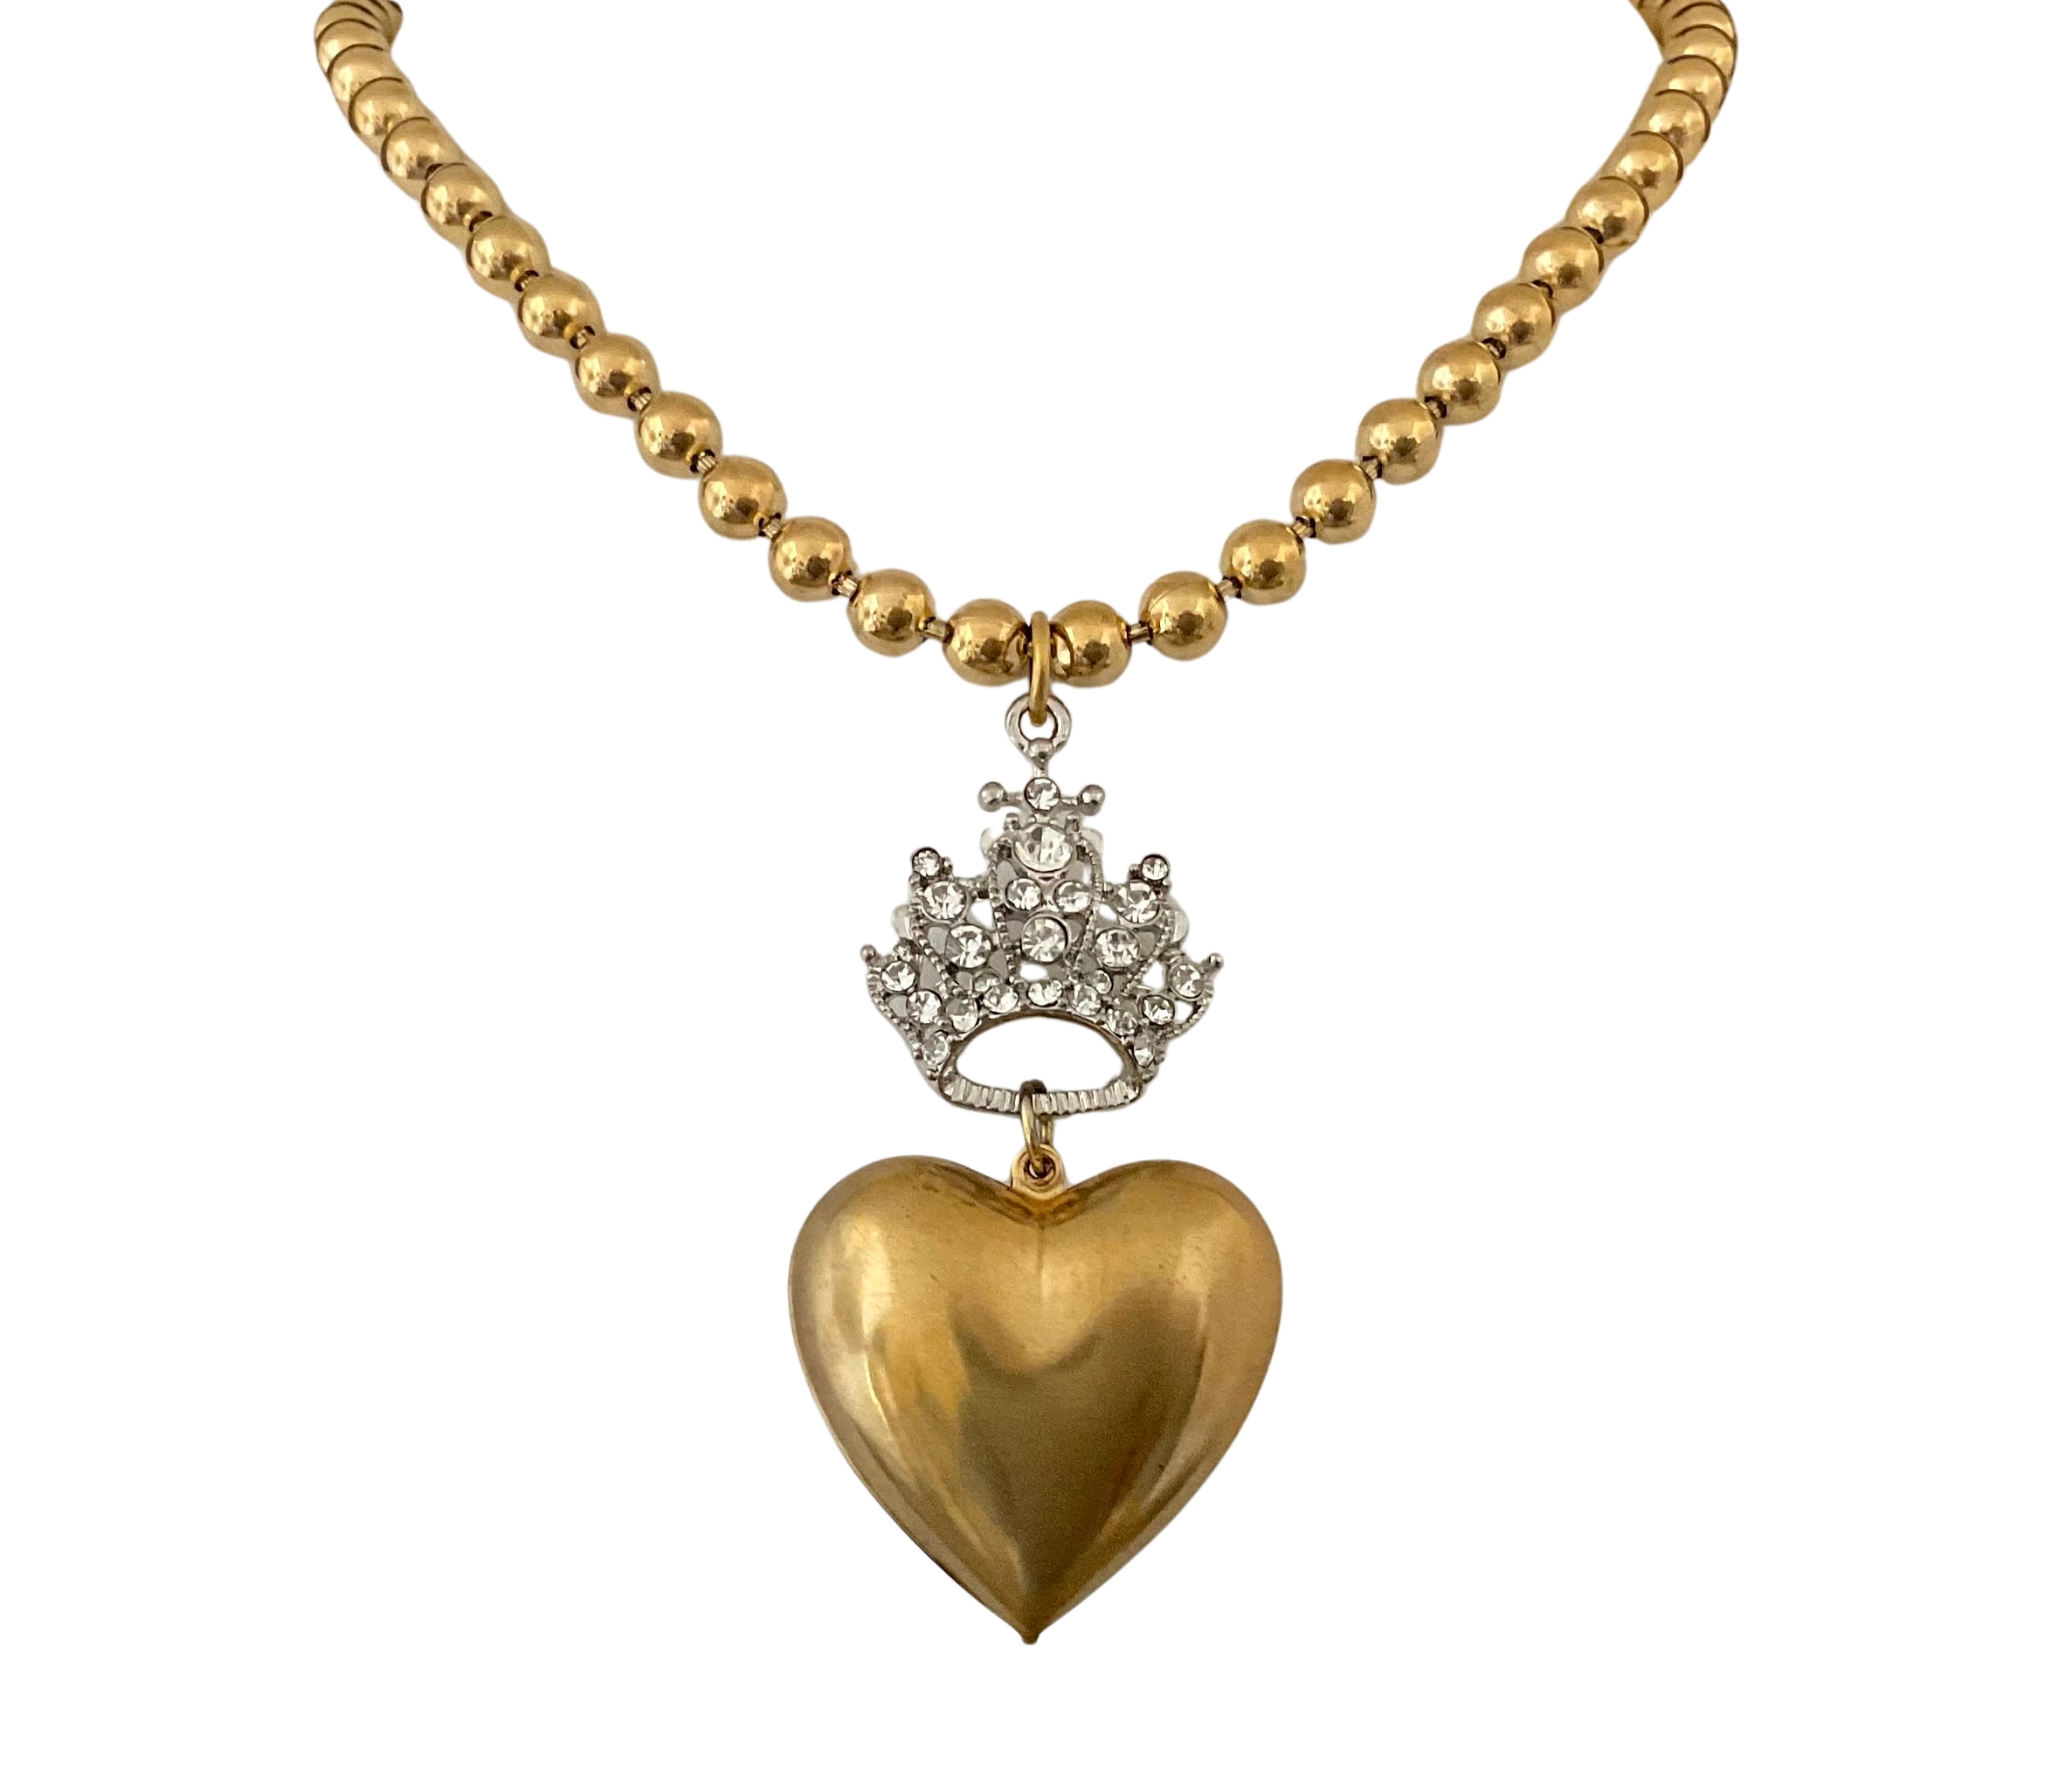 Vintage Gold Heart and & Crown Necklace 16